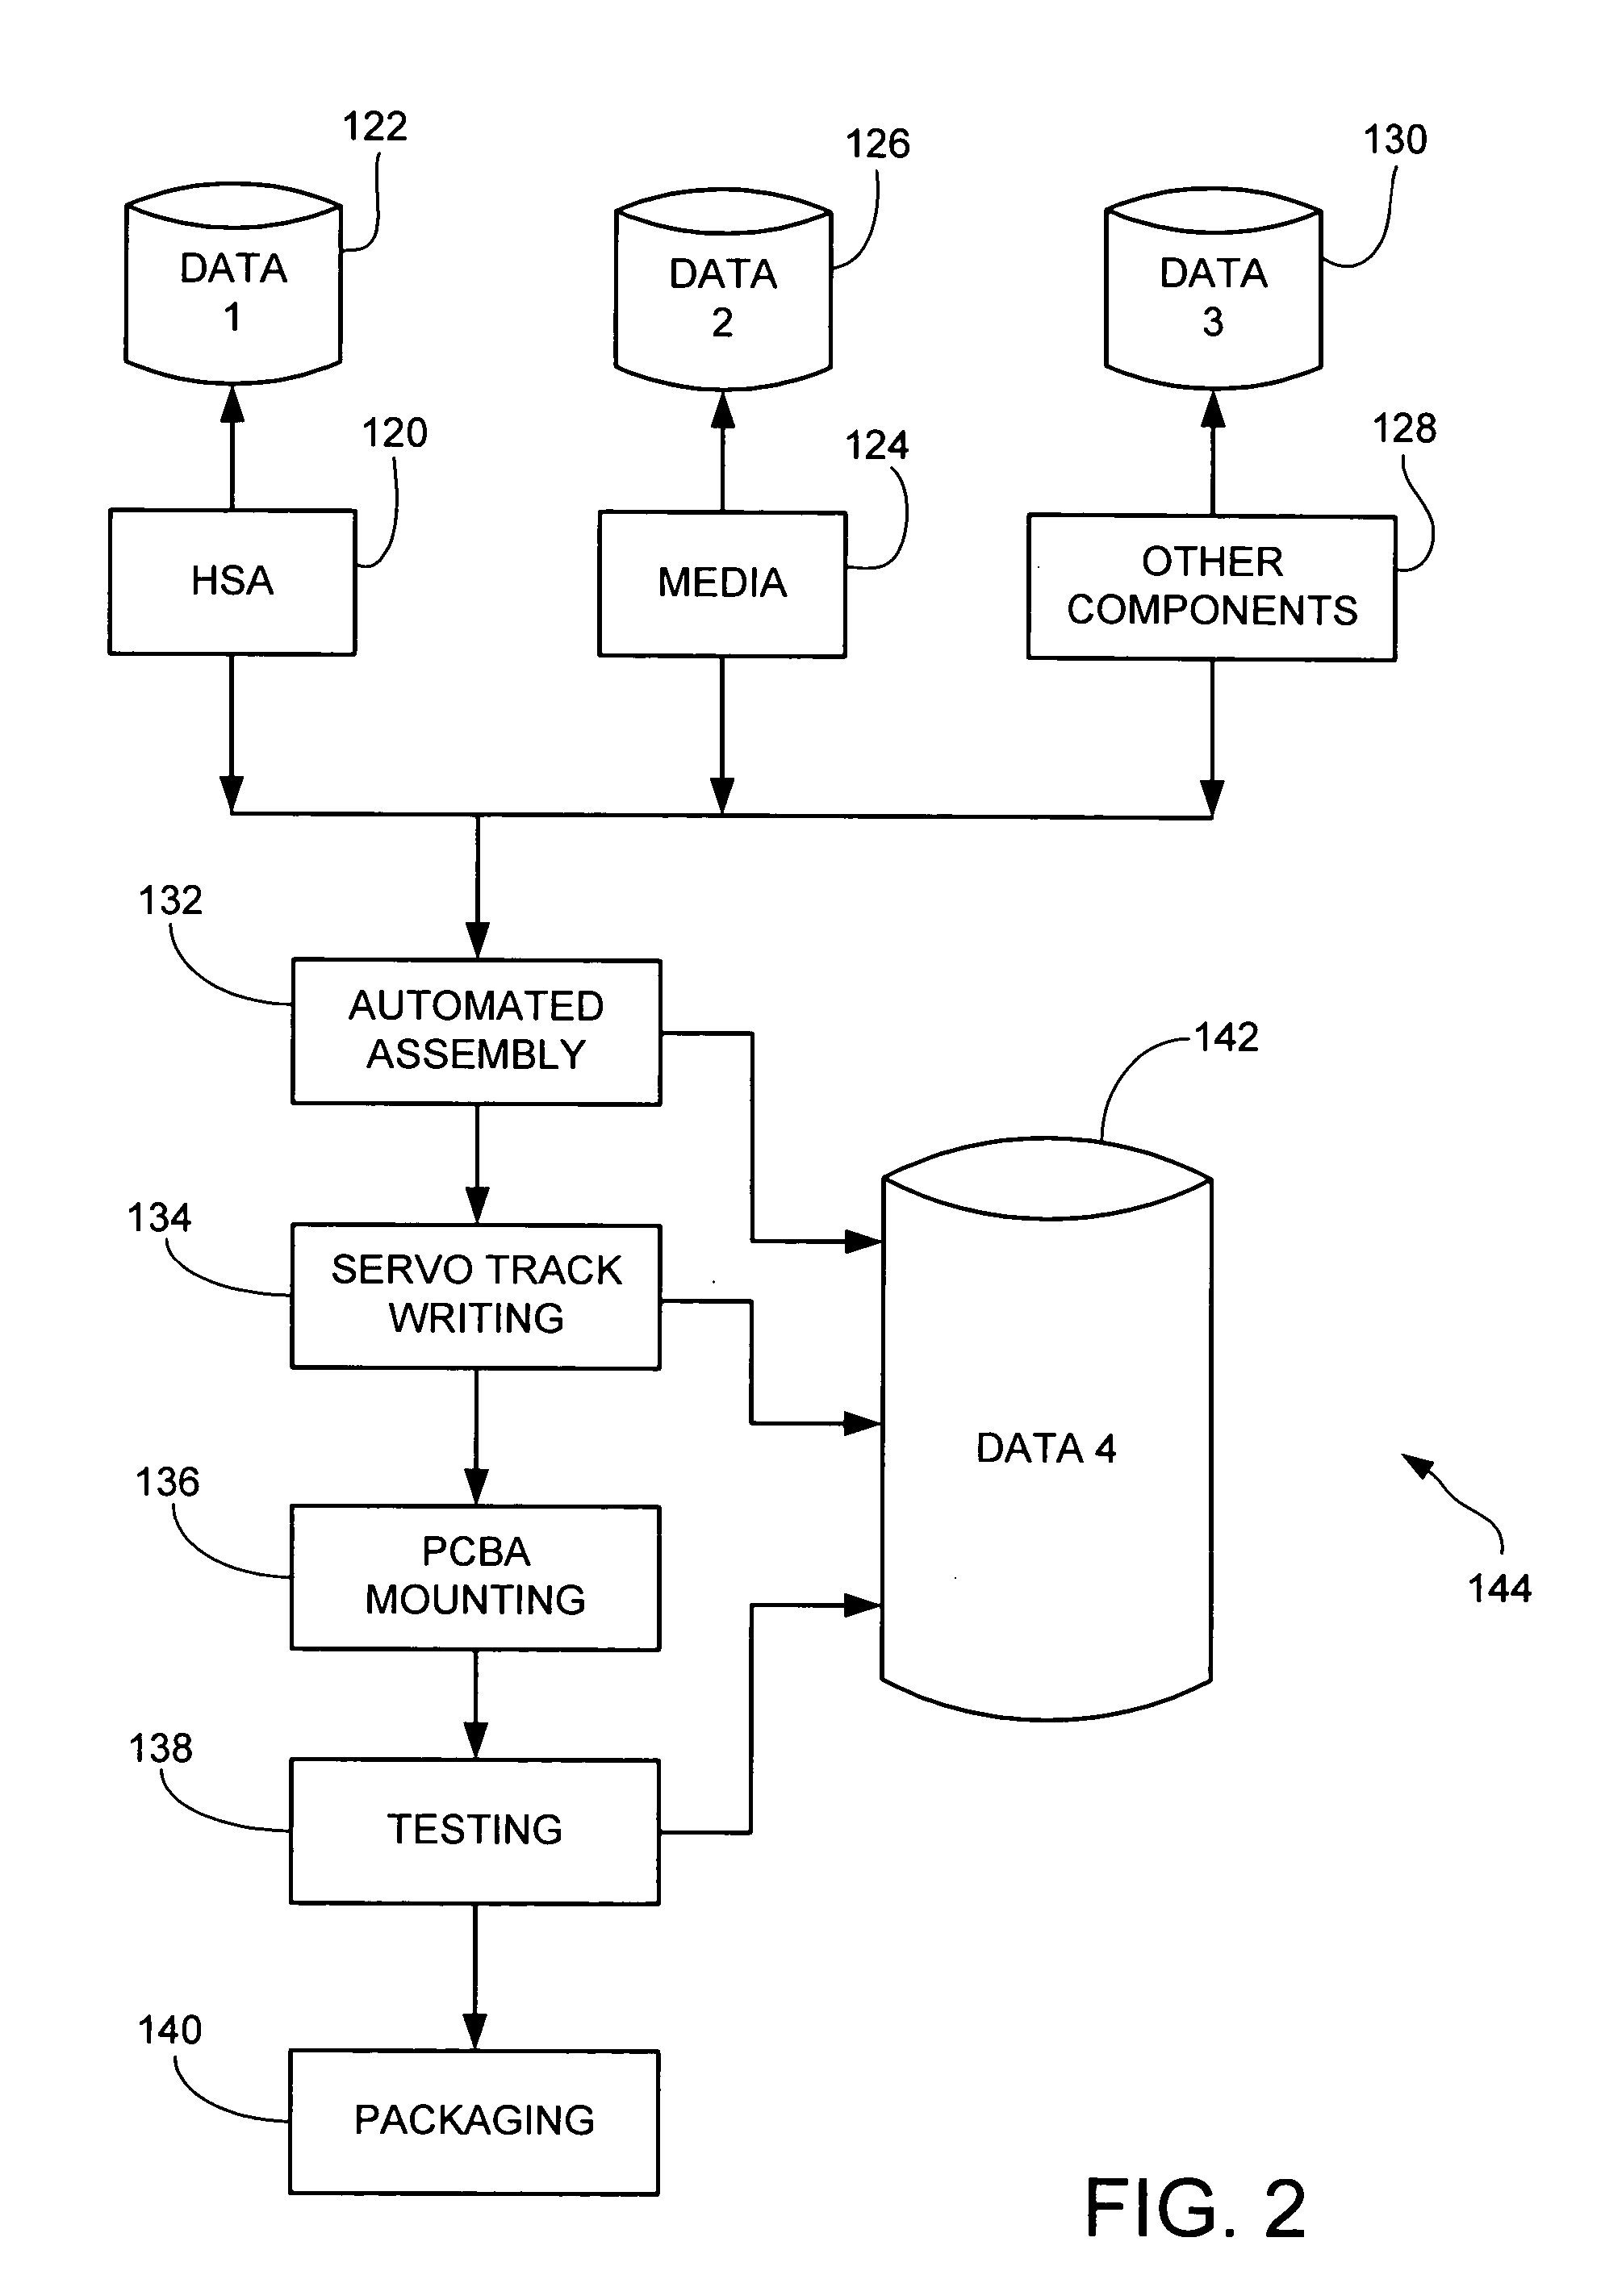 Method and apparatus for querying a computerized database